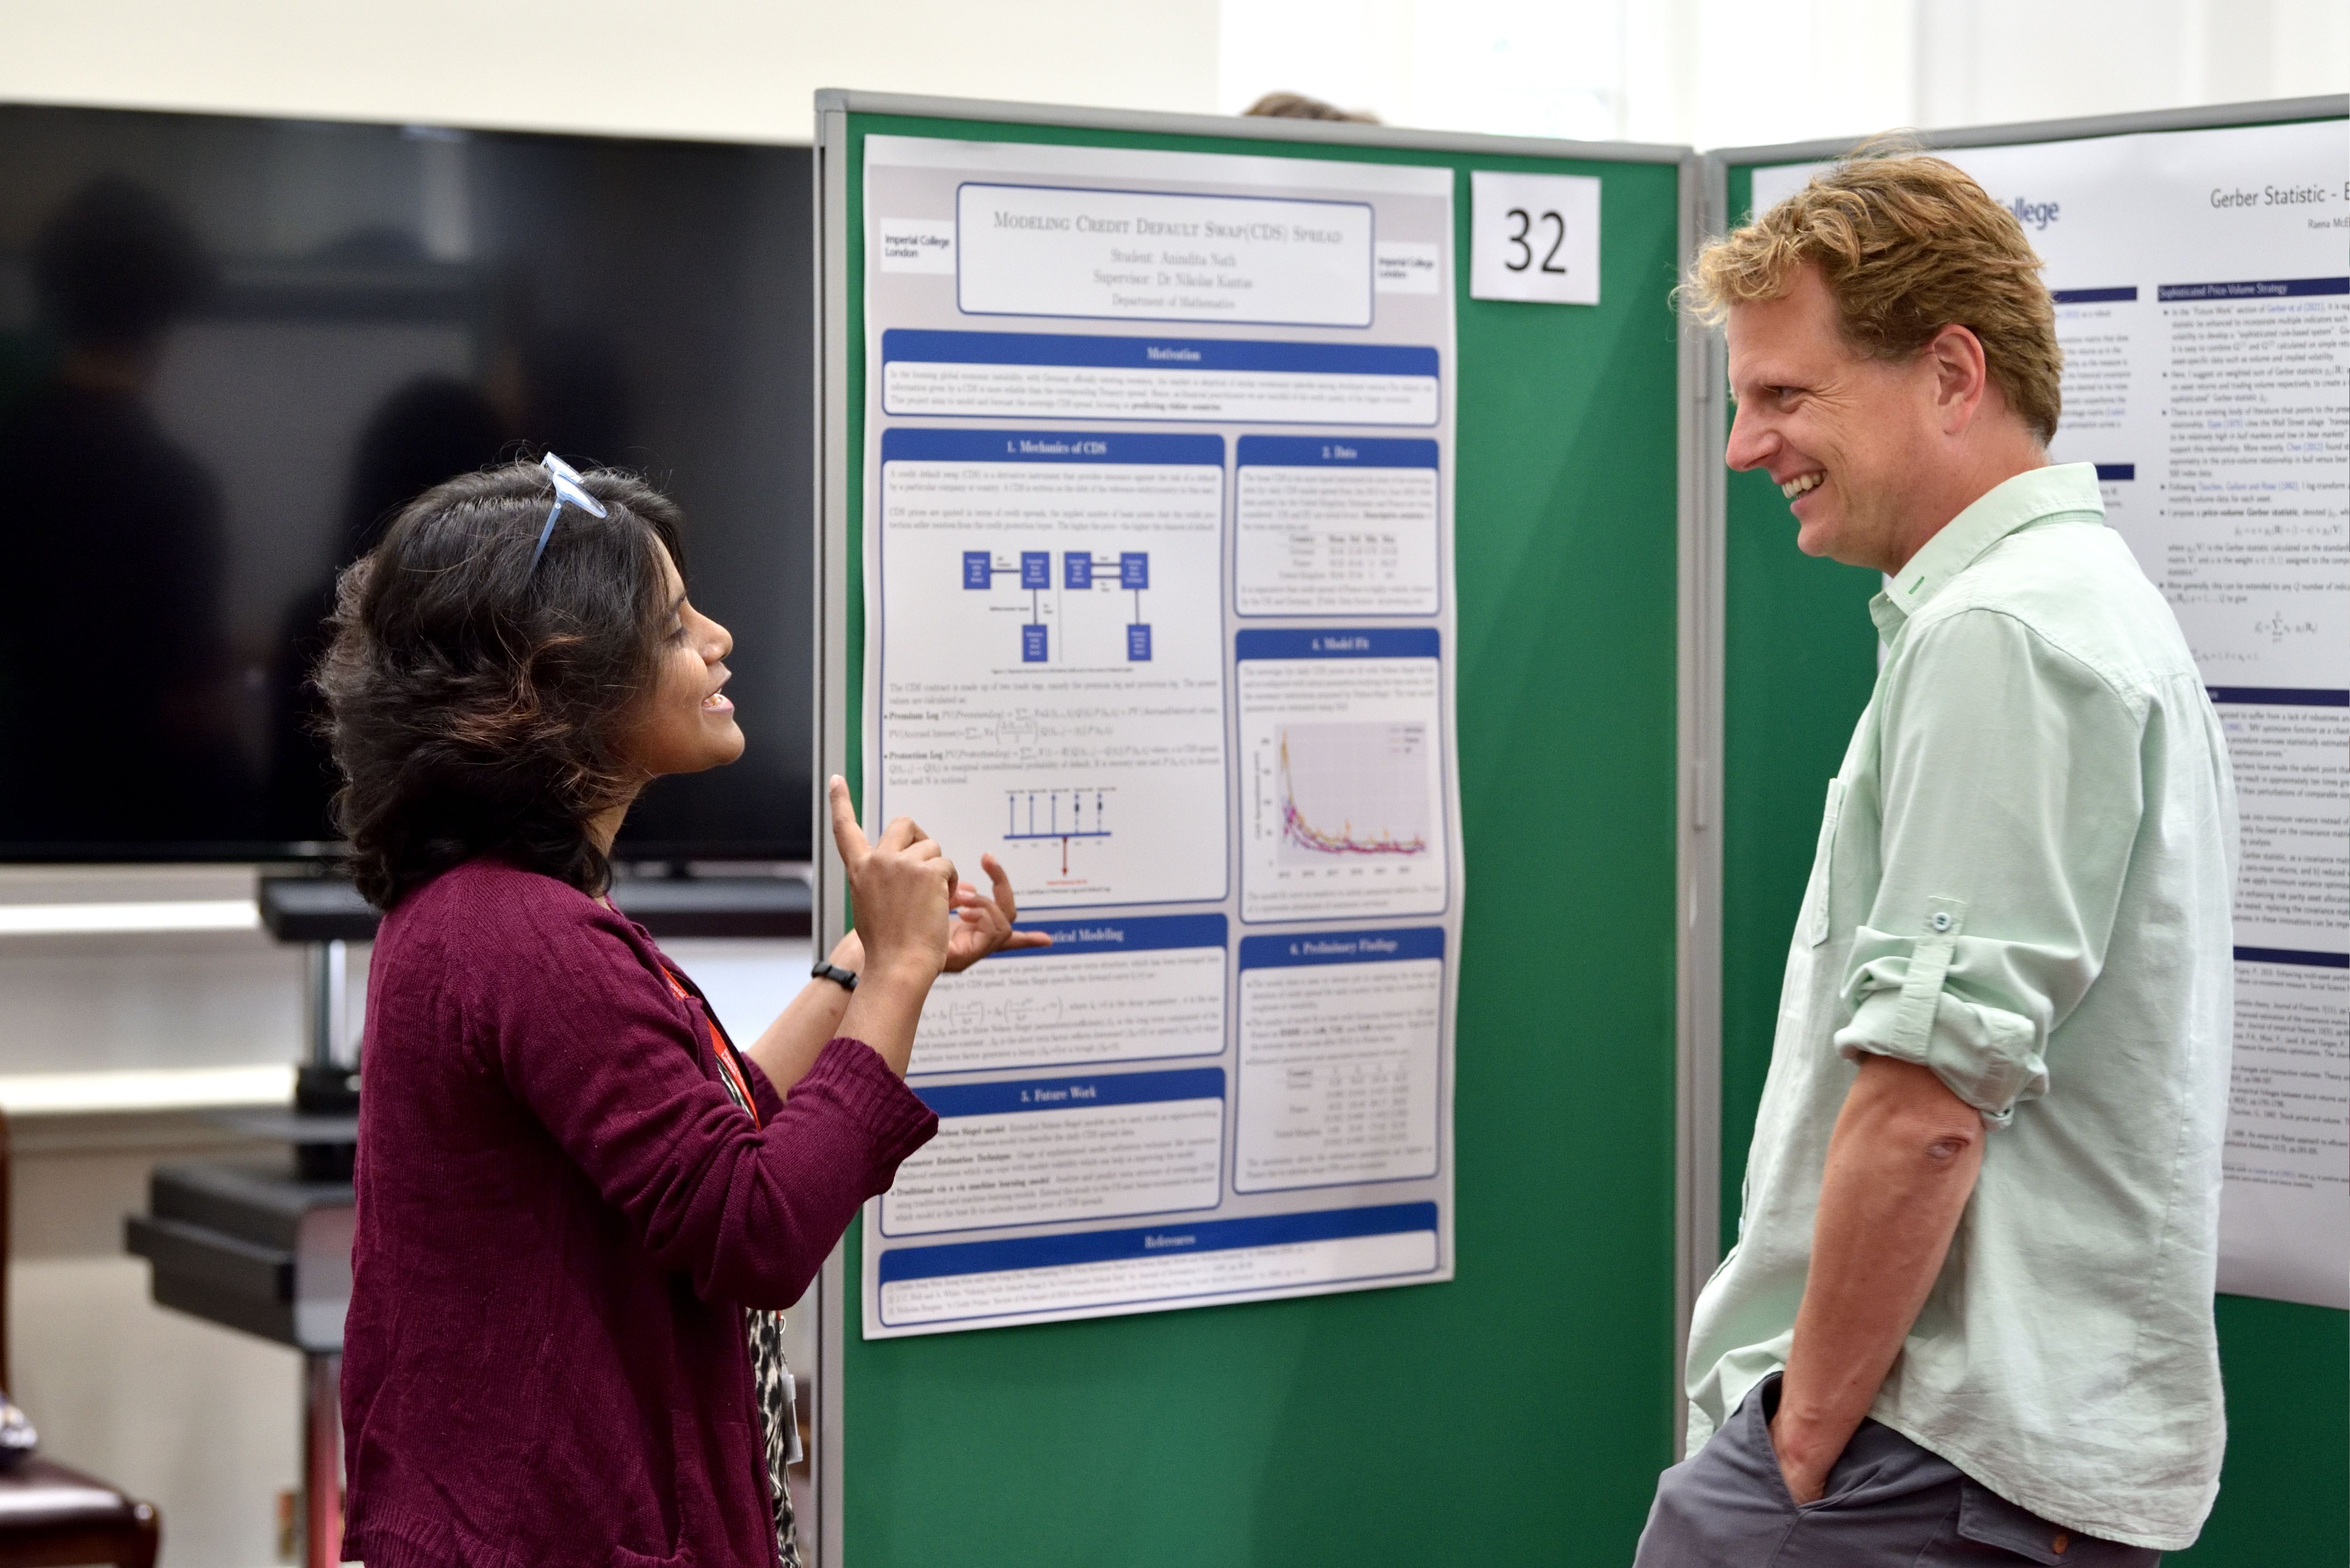 A woman and a man talking and smiling in front of panels with some graphs